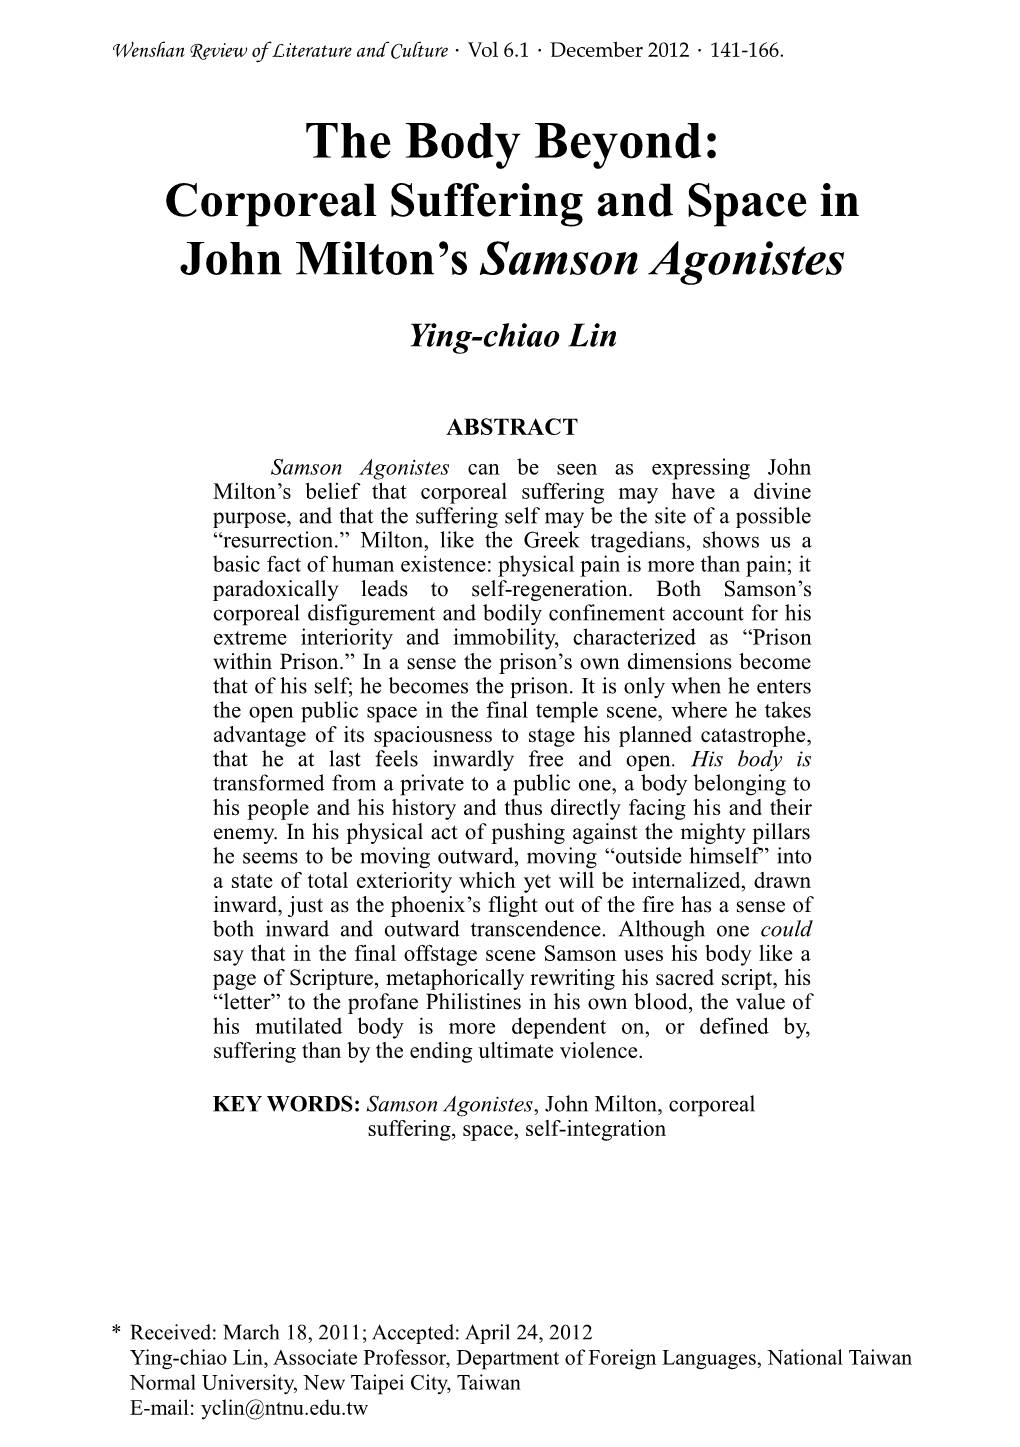 The Body Beyond: Corporeal Suffering and Space in John Milton's Samson Agonistes